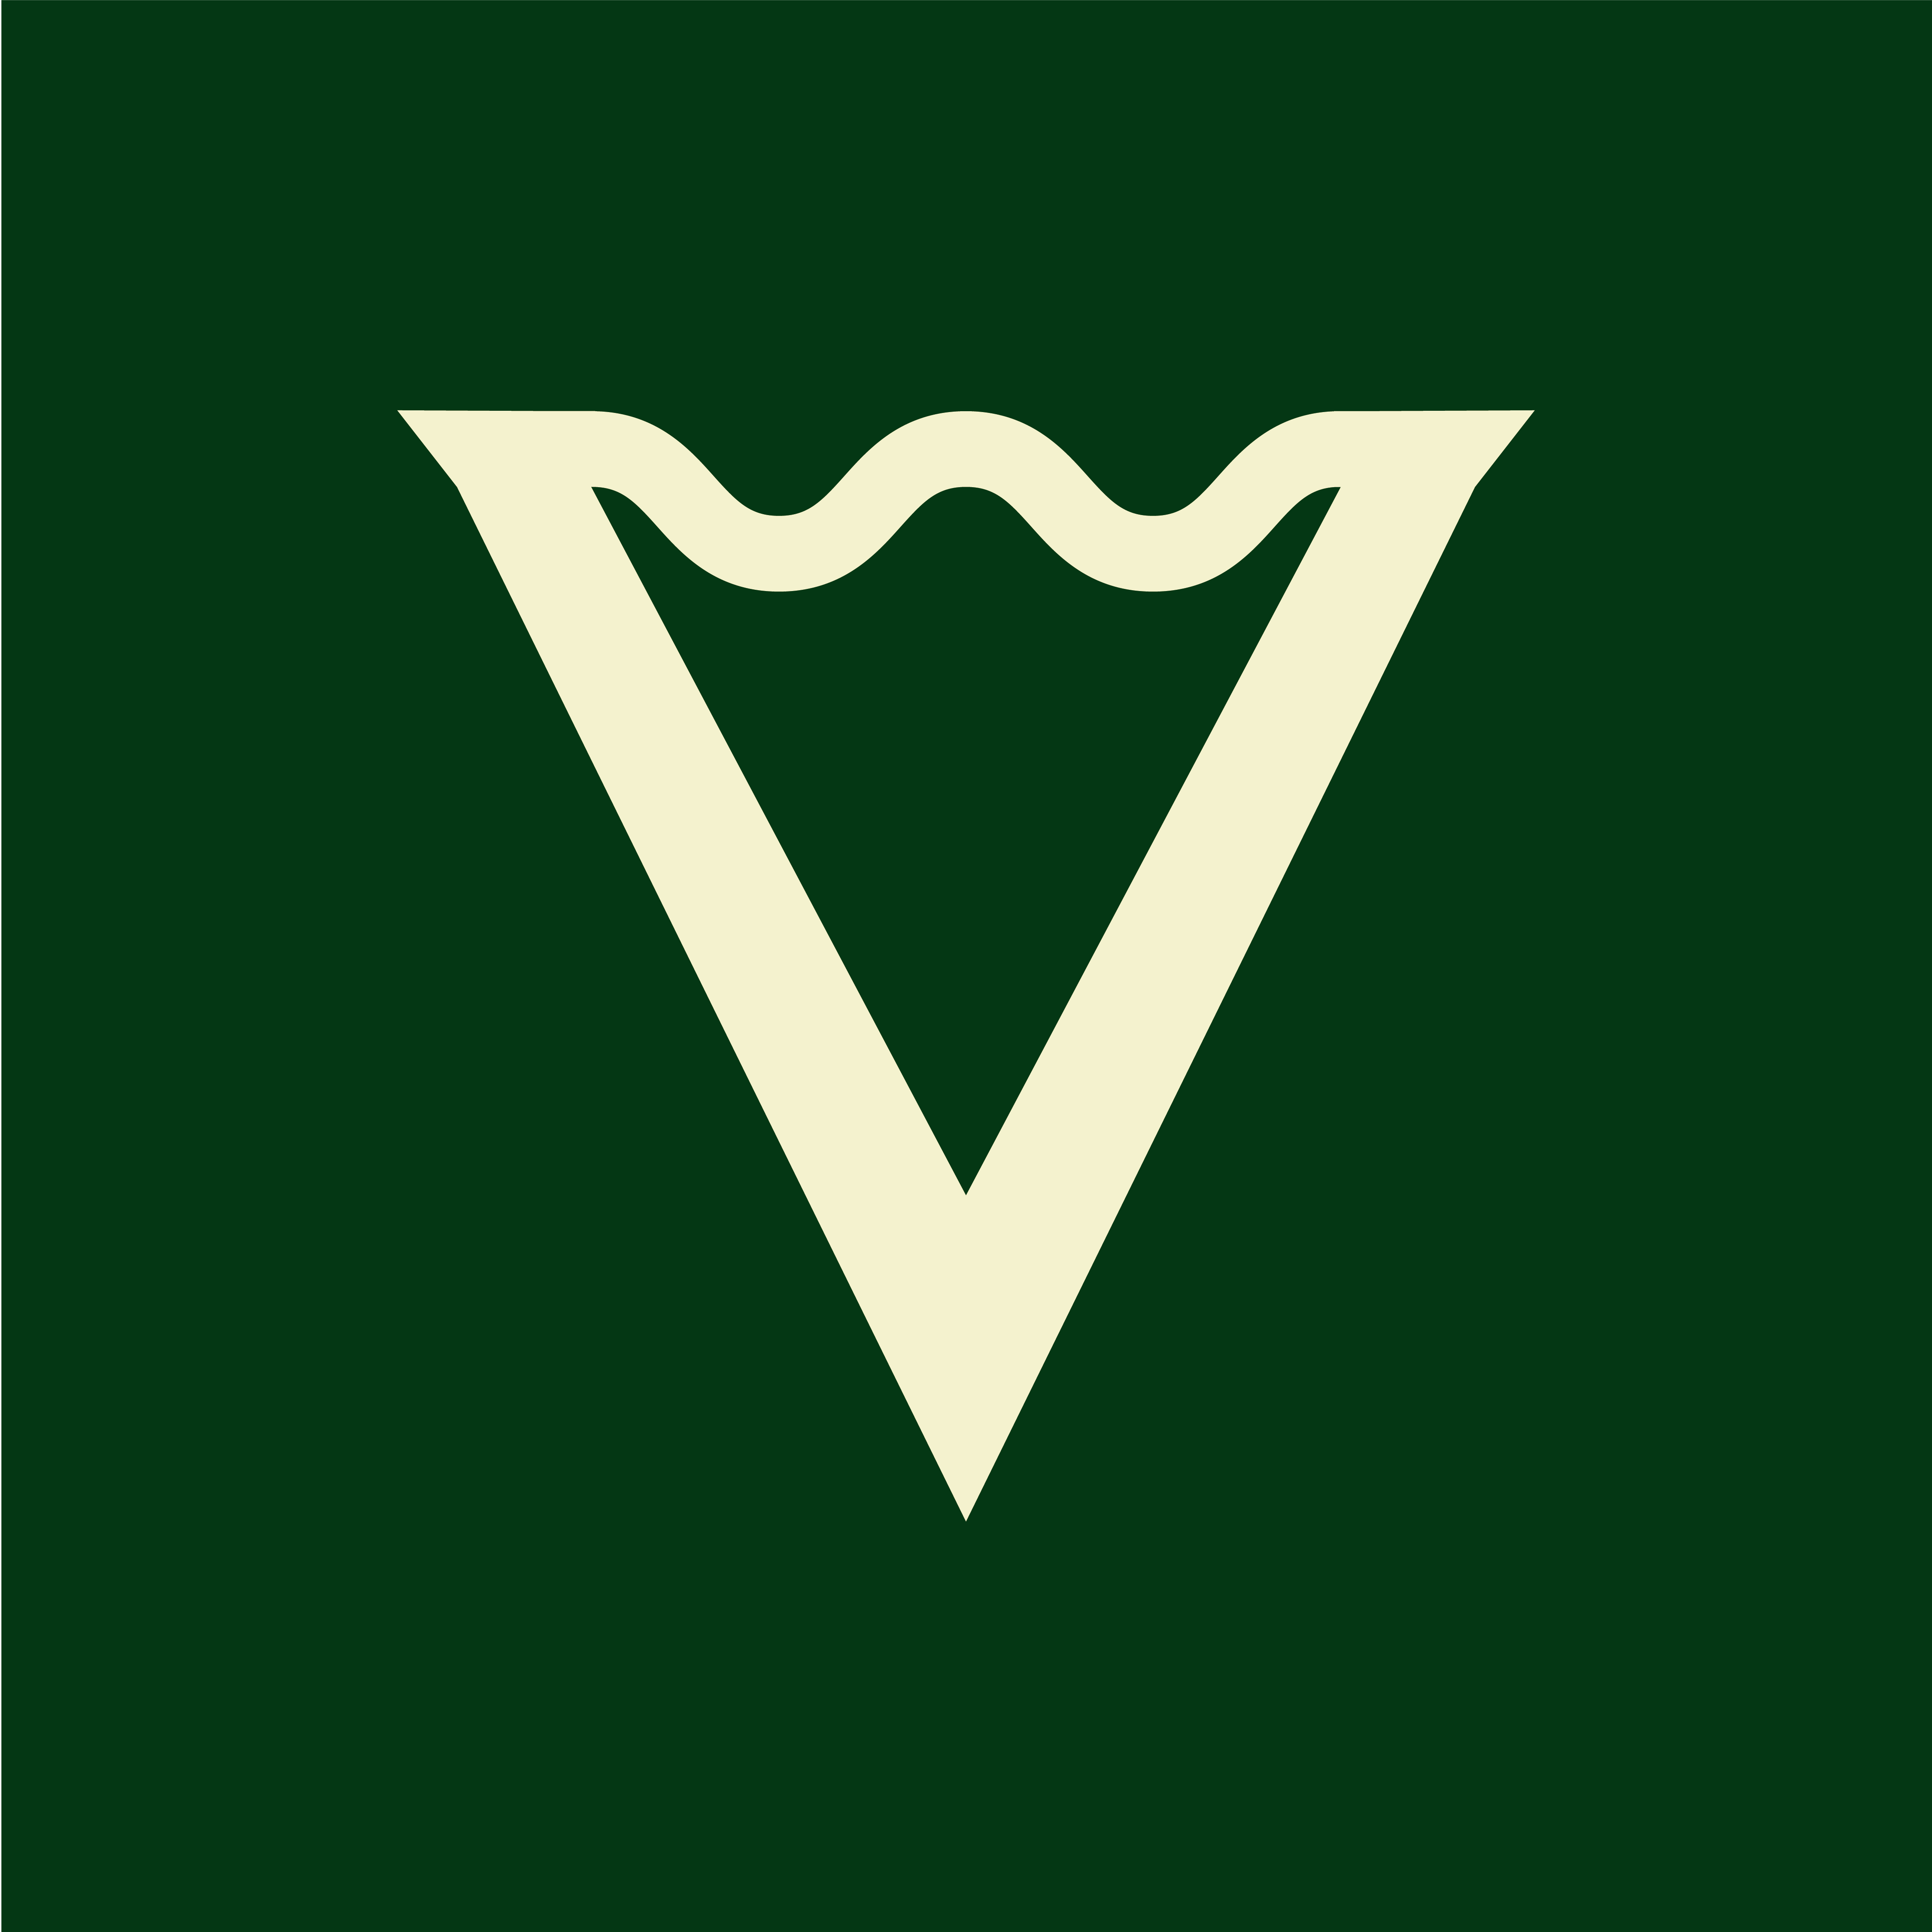 Thumbnail for video asset shows the letter V in off-white on a dark green background, with the shape of waves as though there is a body of water held in the letterform